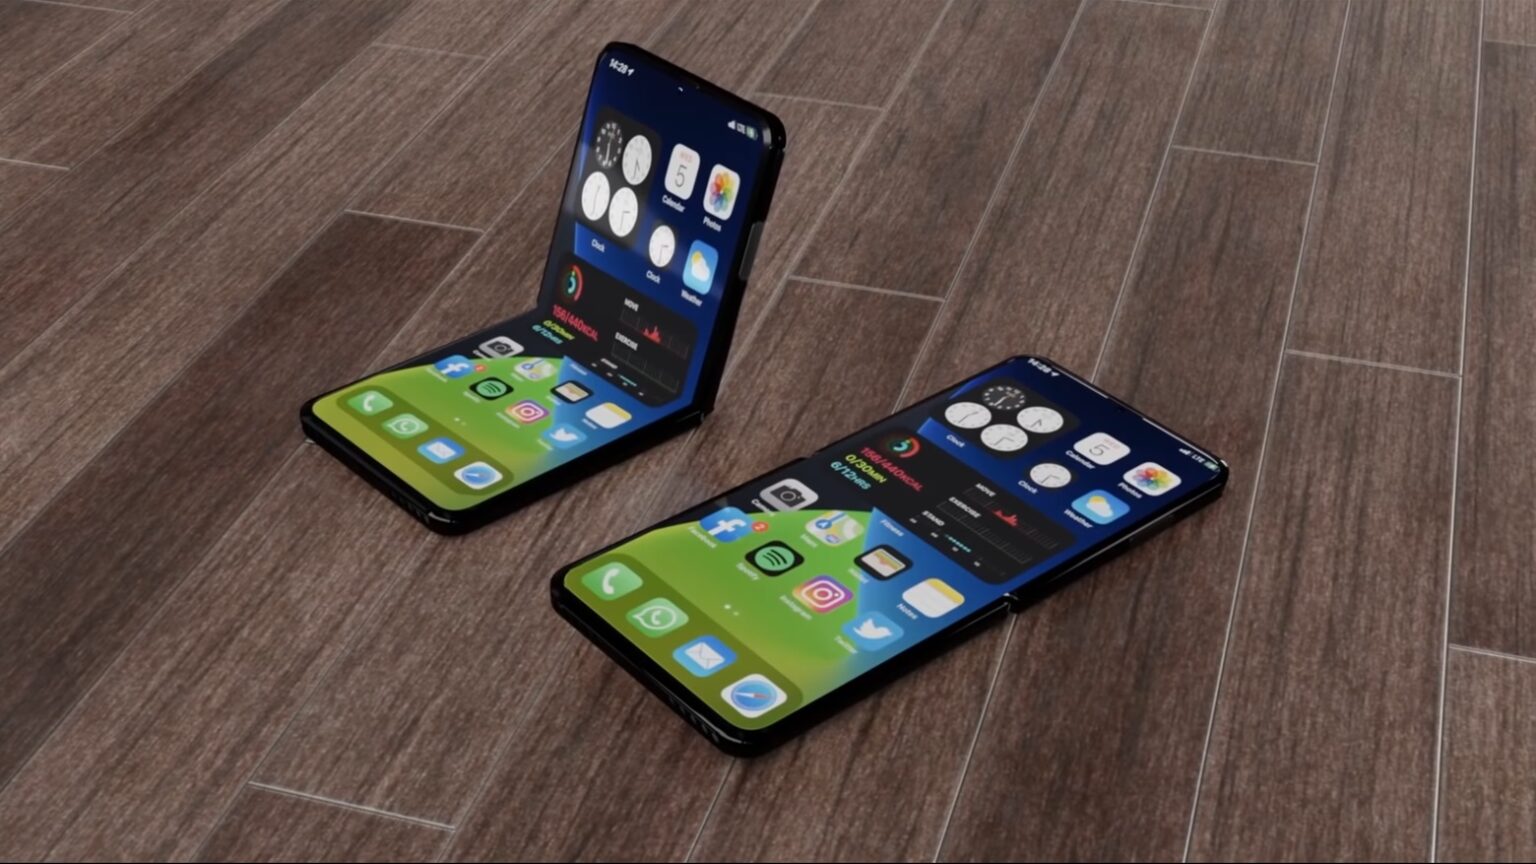 An iPhone concept shows a realistic folding iPhone design